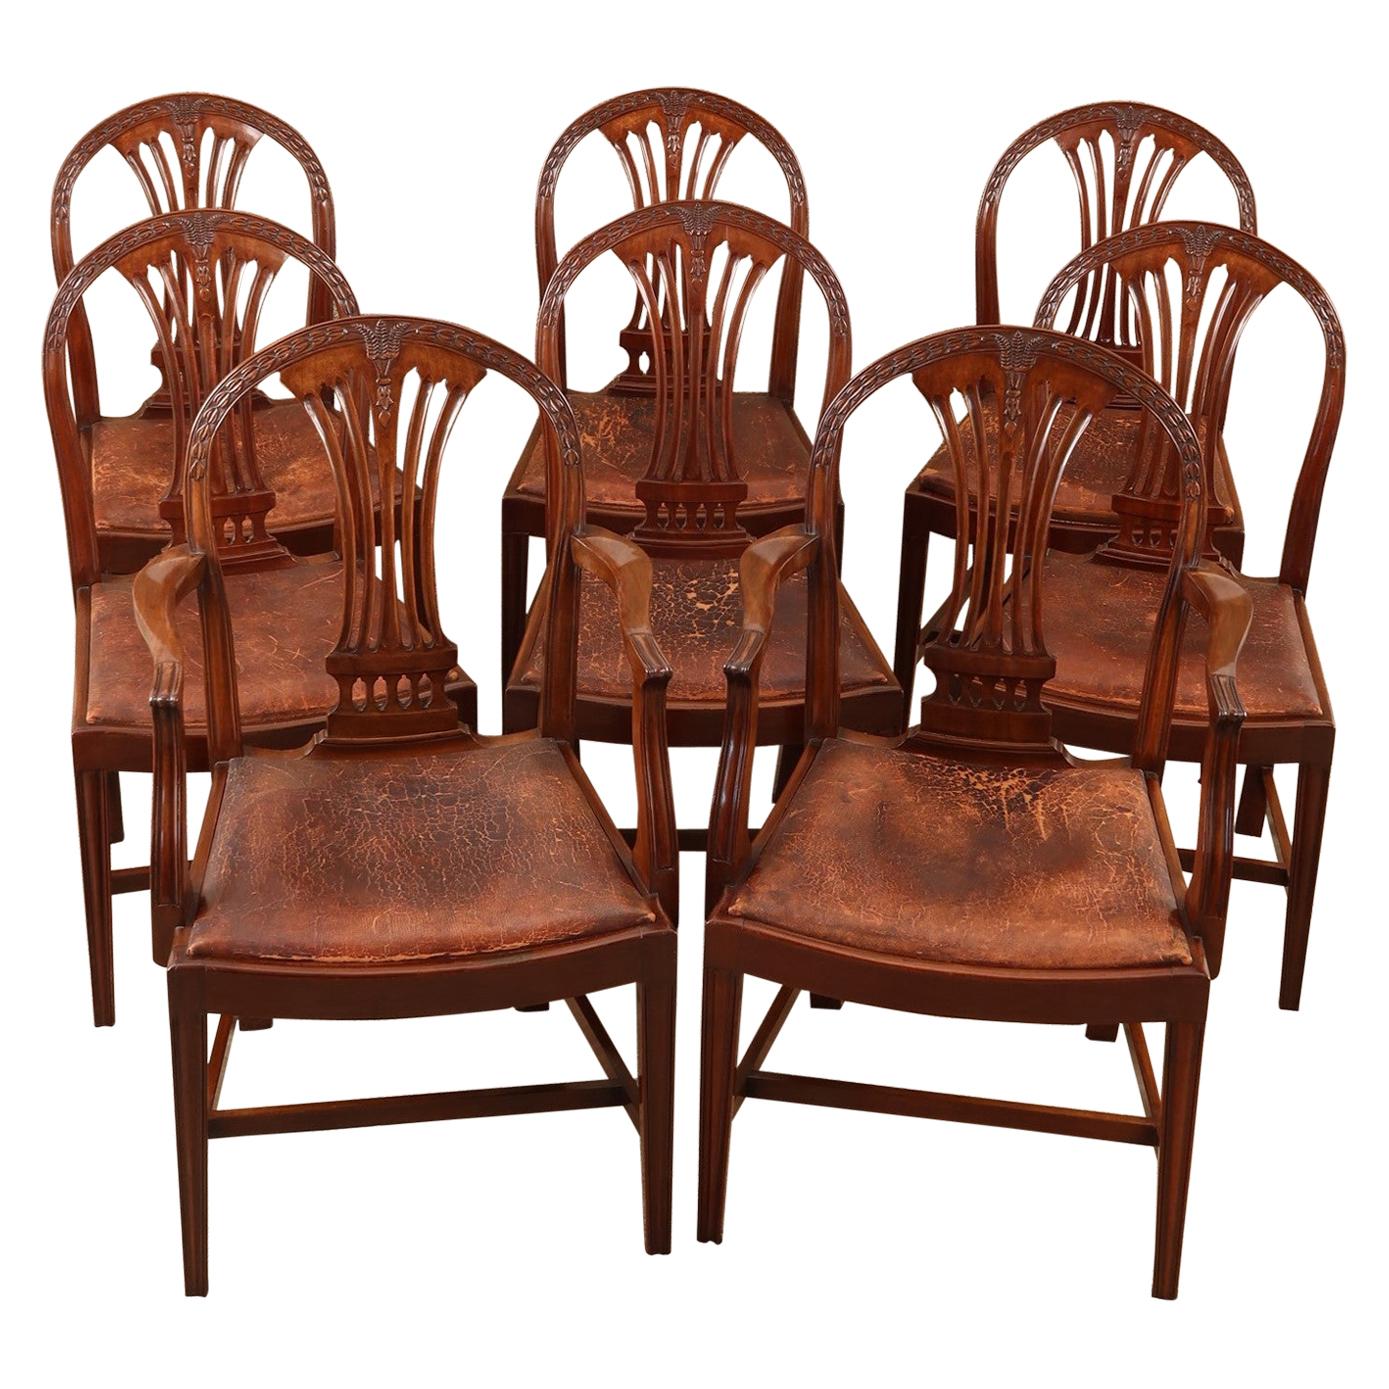 Exceptional Set of 8 English Hepplewhite Style Dining Chairs, circa 1880 For Sale